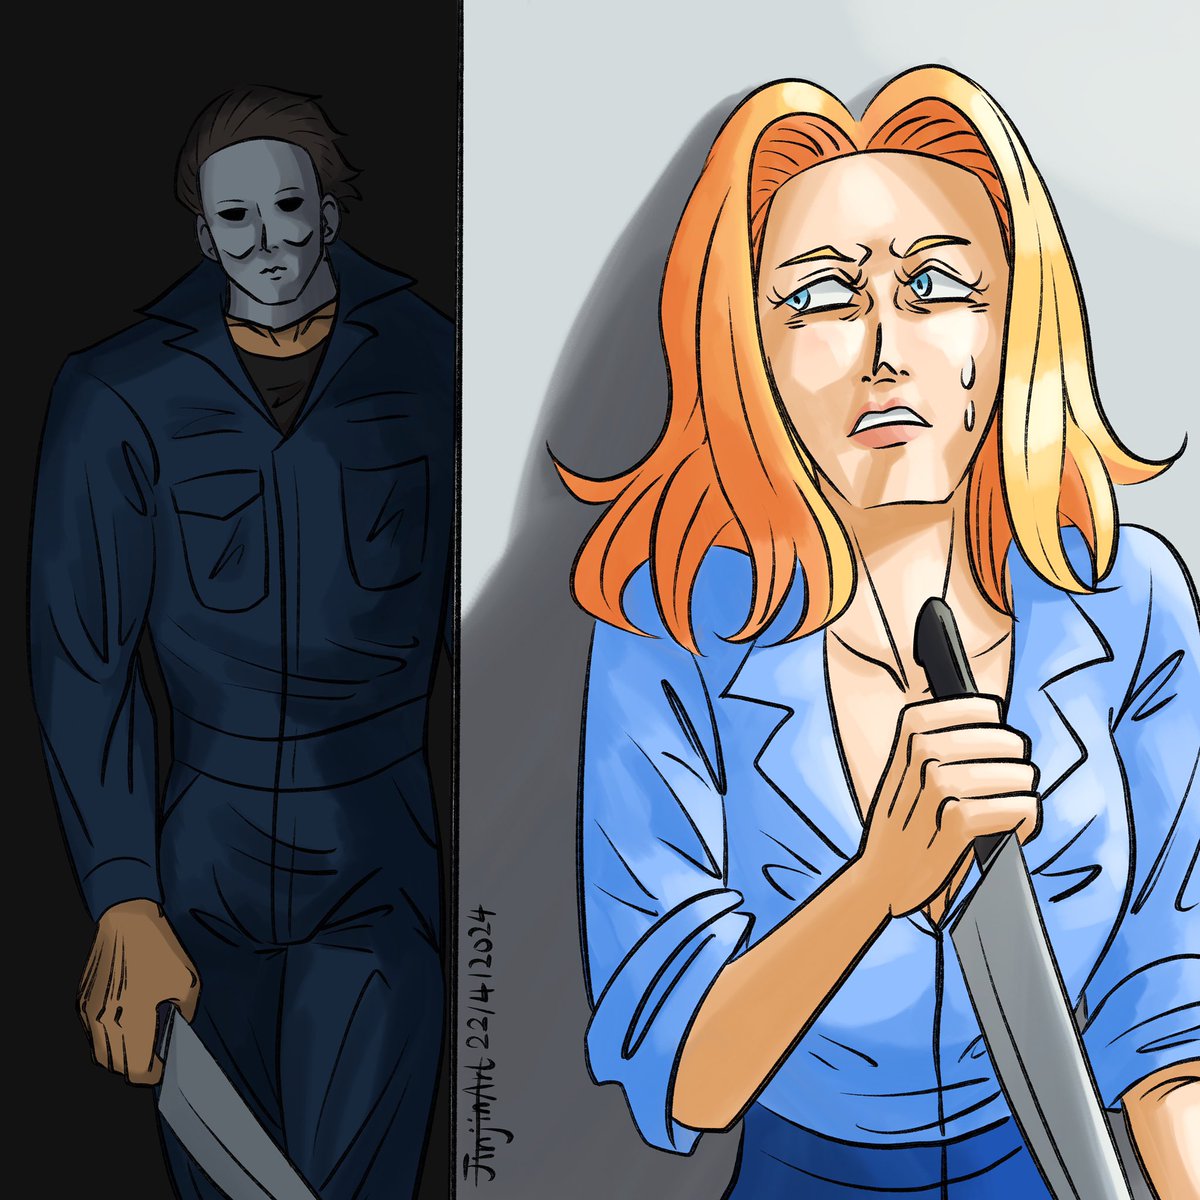 They are playing hide and seek with knives.

#halloween #MichaelMyers  #LaurieStrode  #マイロリ #마이로리 #mylaurie